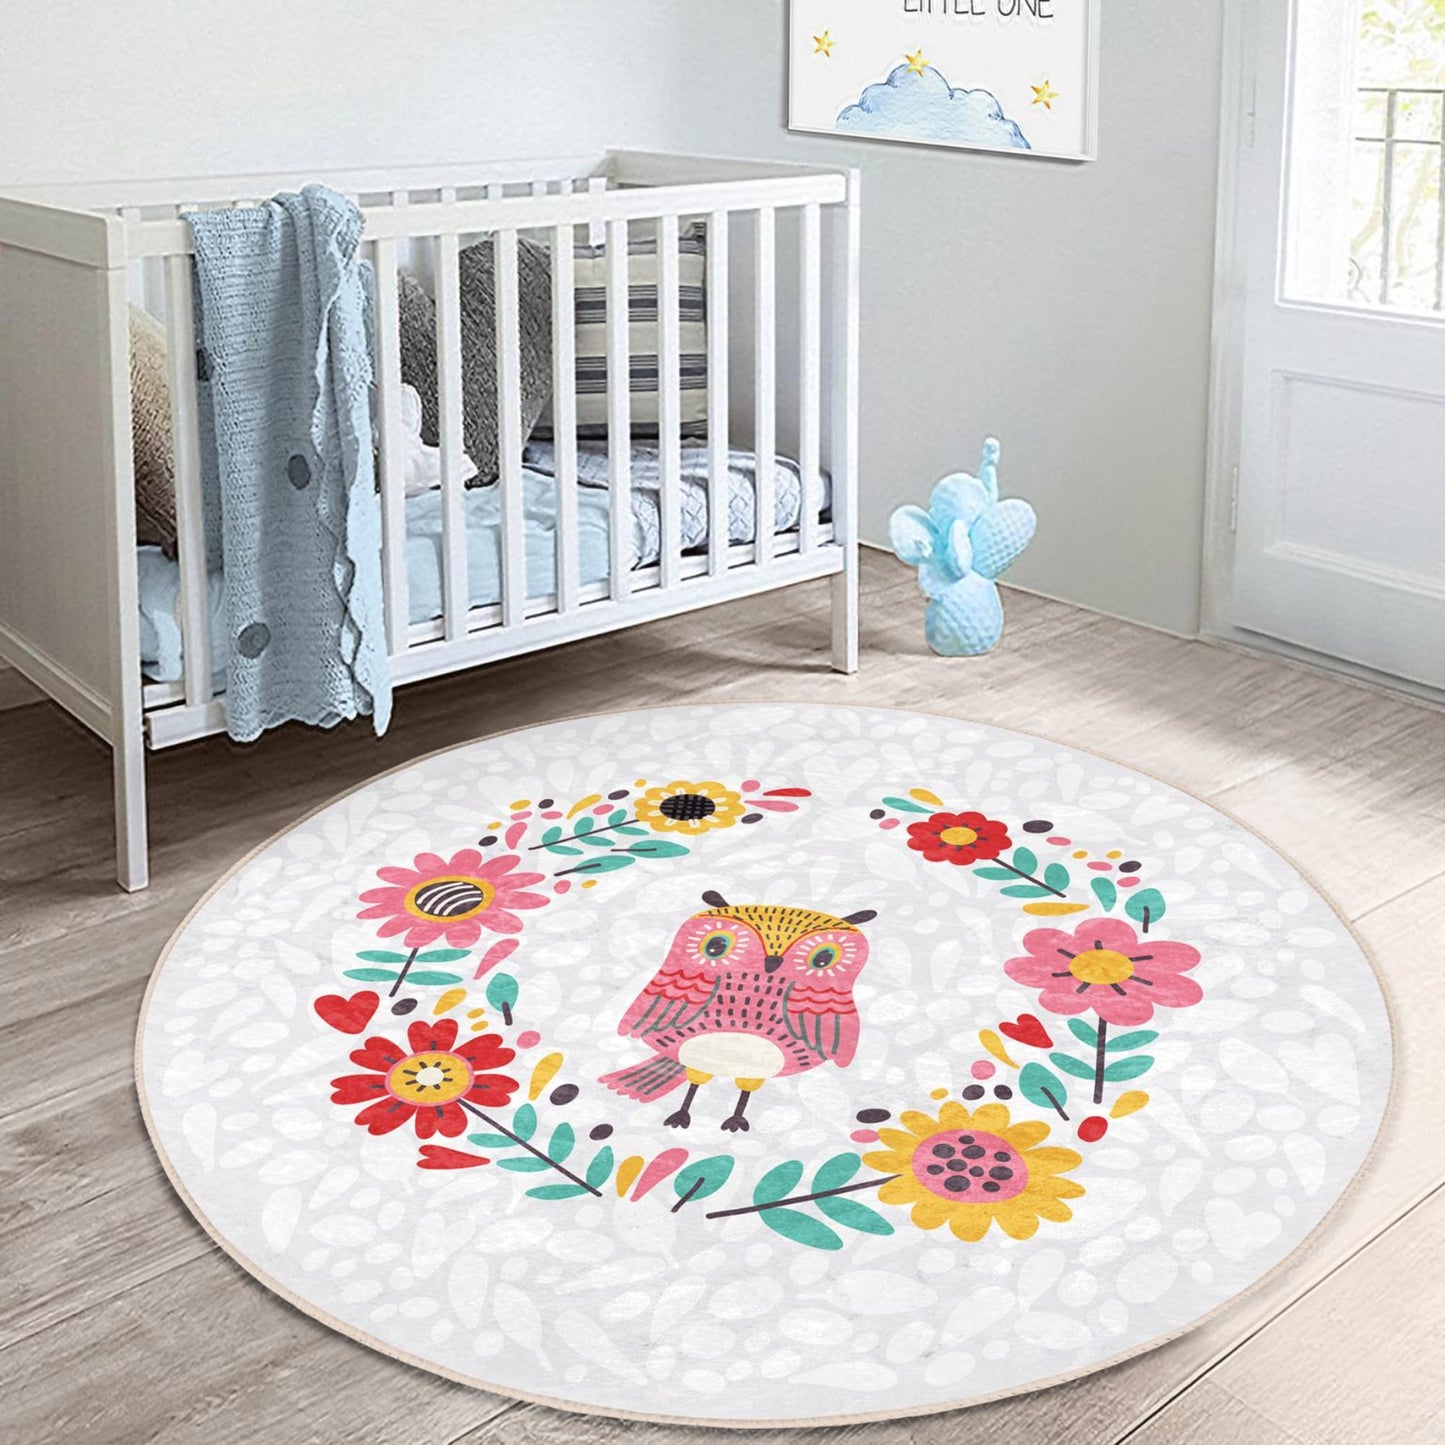 Vibrant rug with charming floral prints for a whimsical atmosphere.